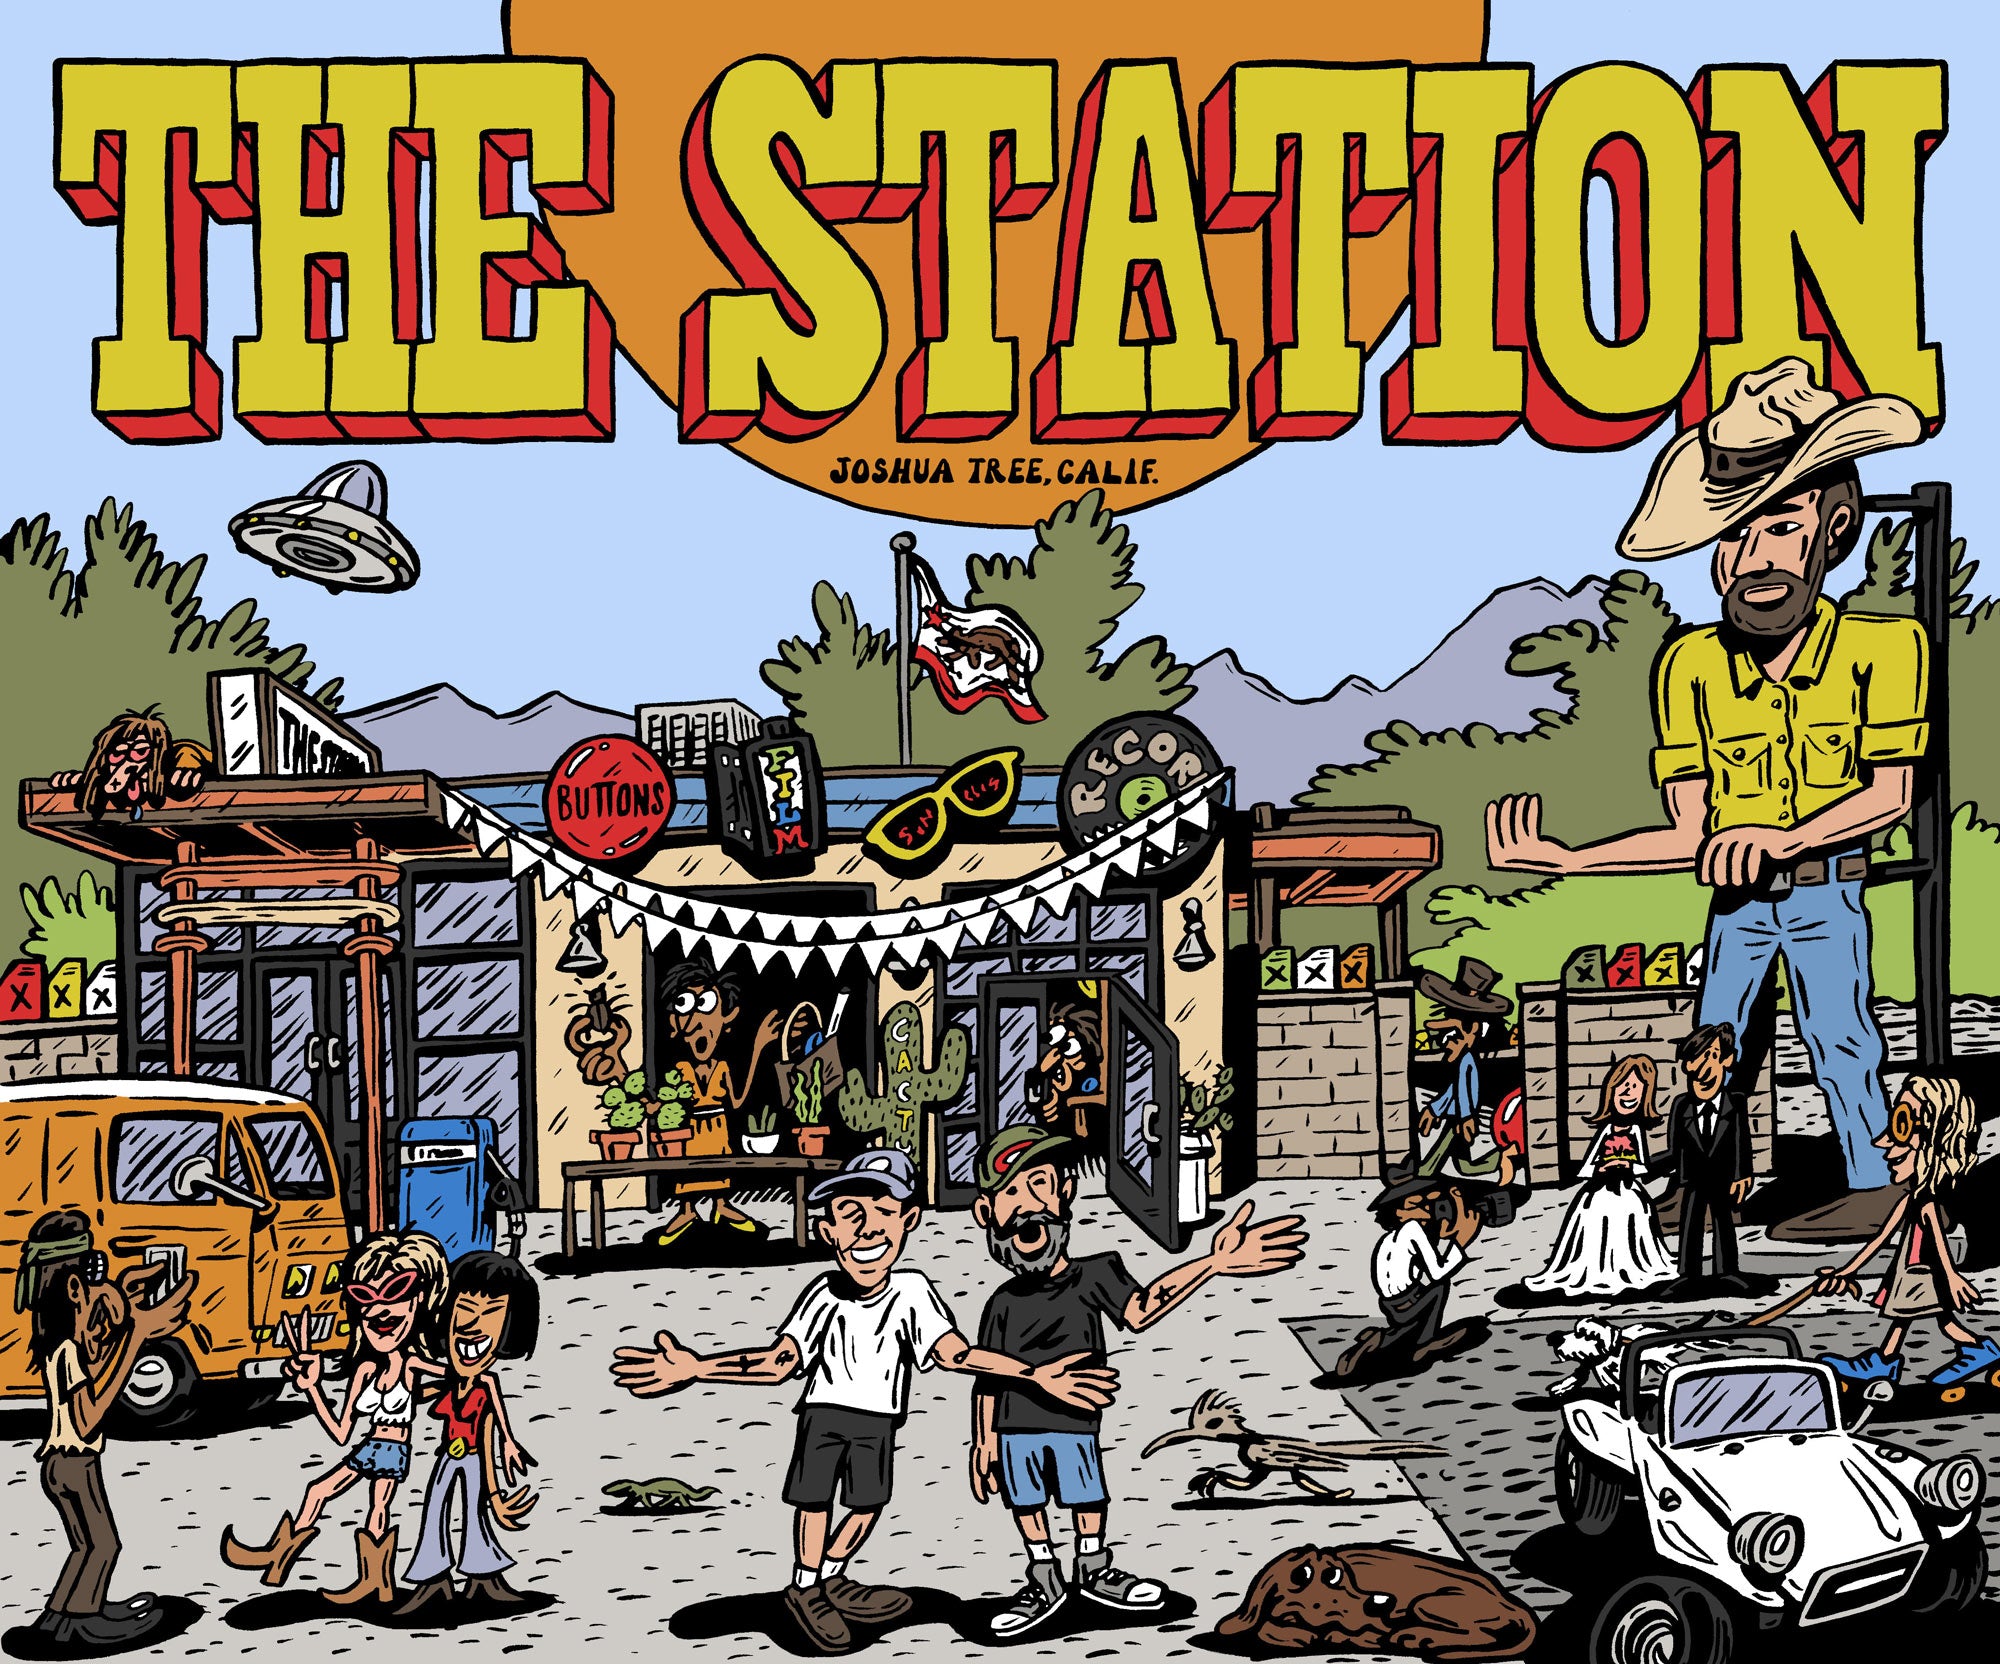 =The Station